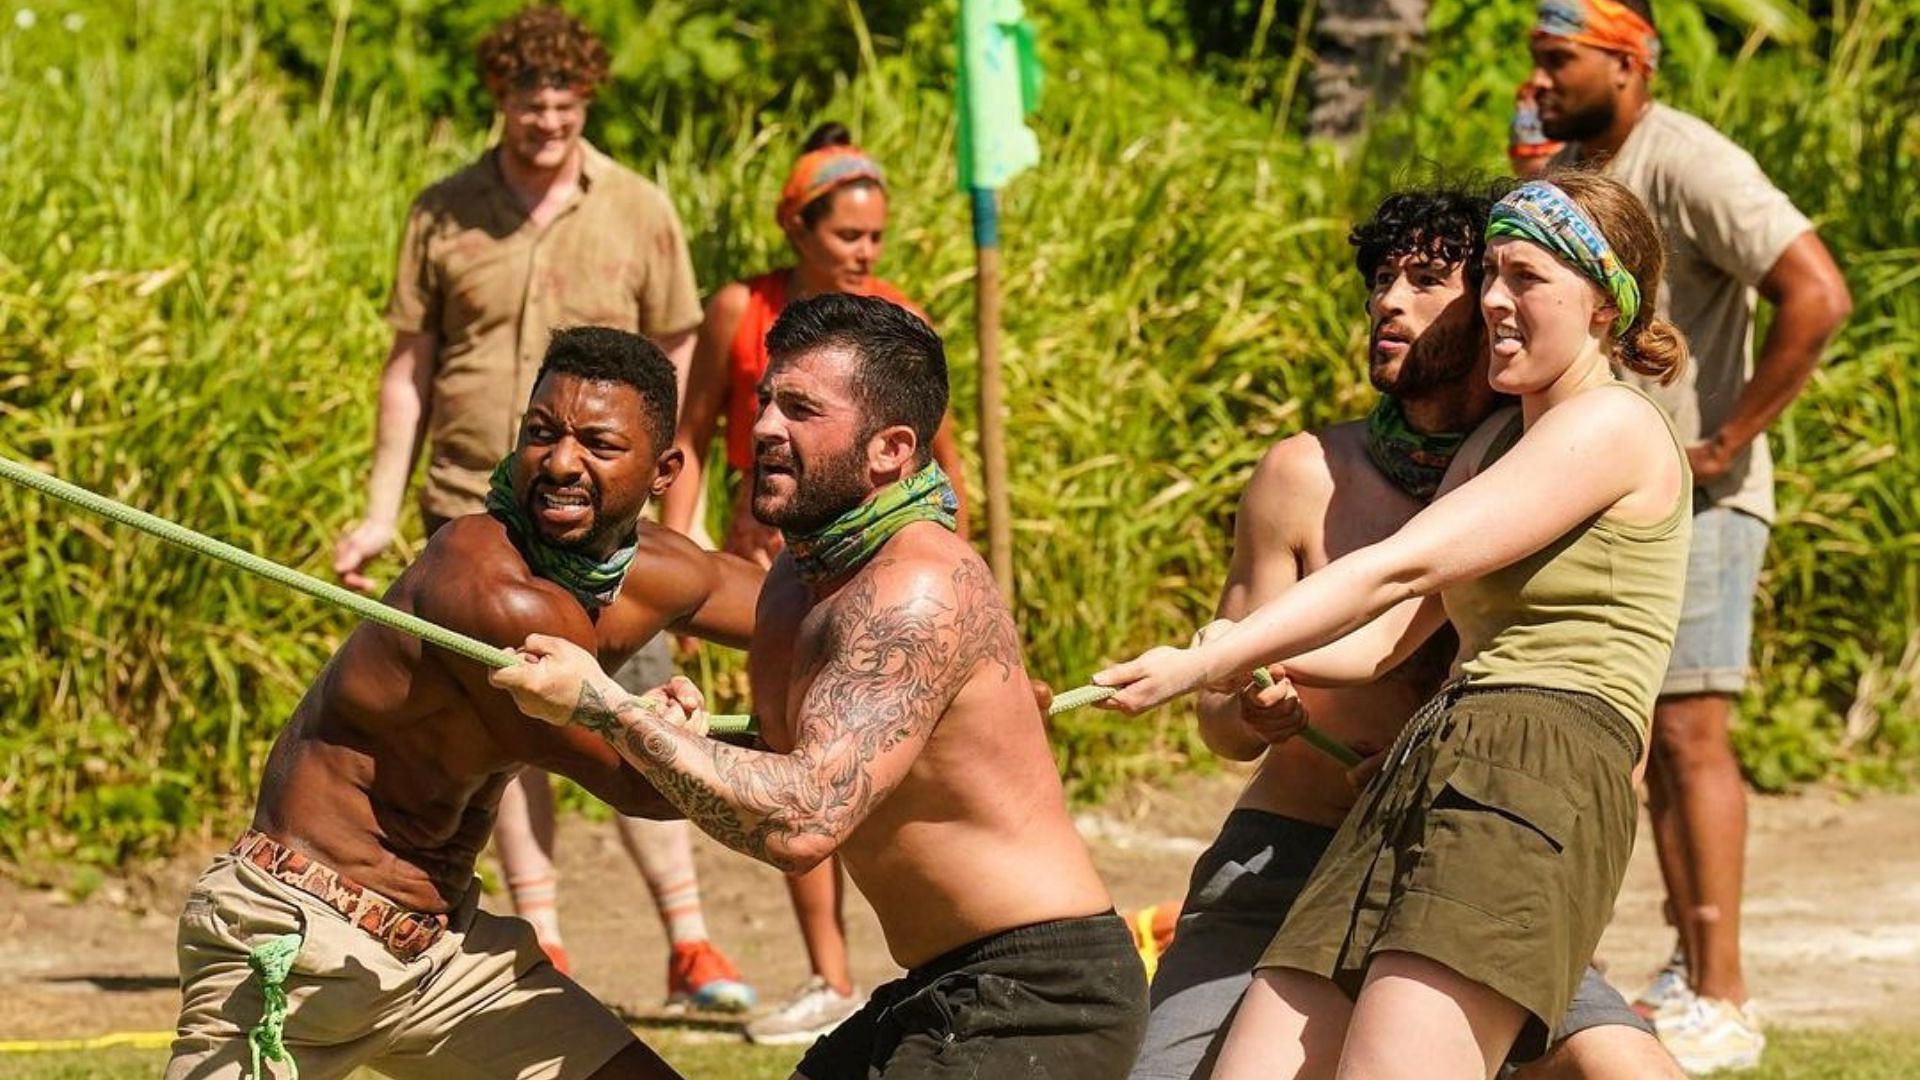 Survivor 44 saw yet another elimination this week